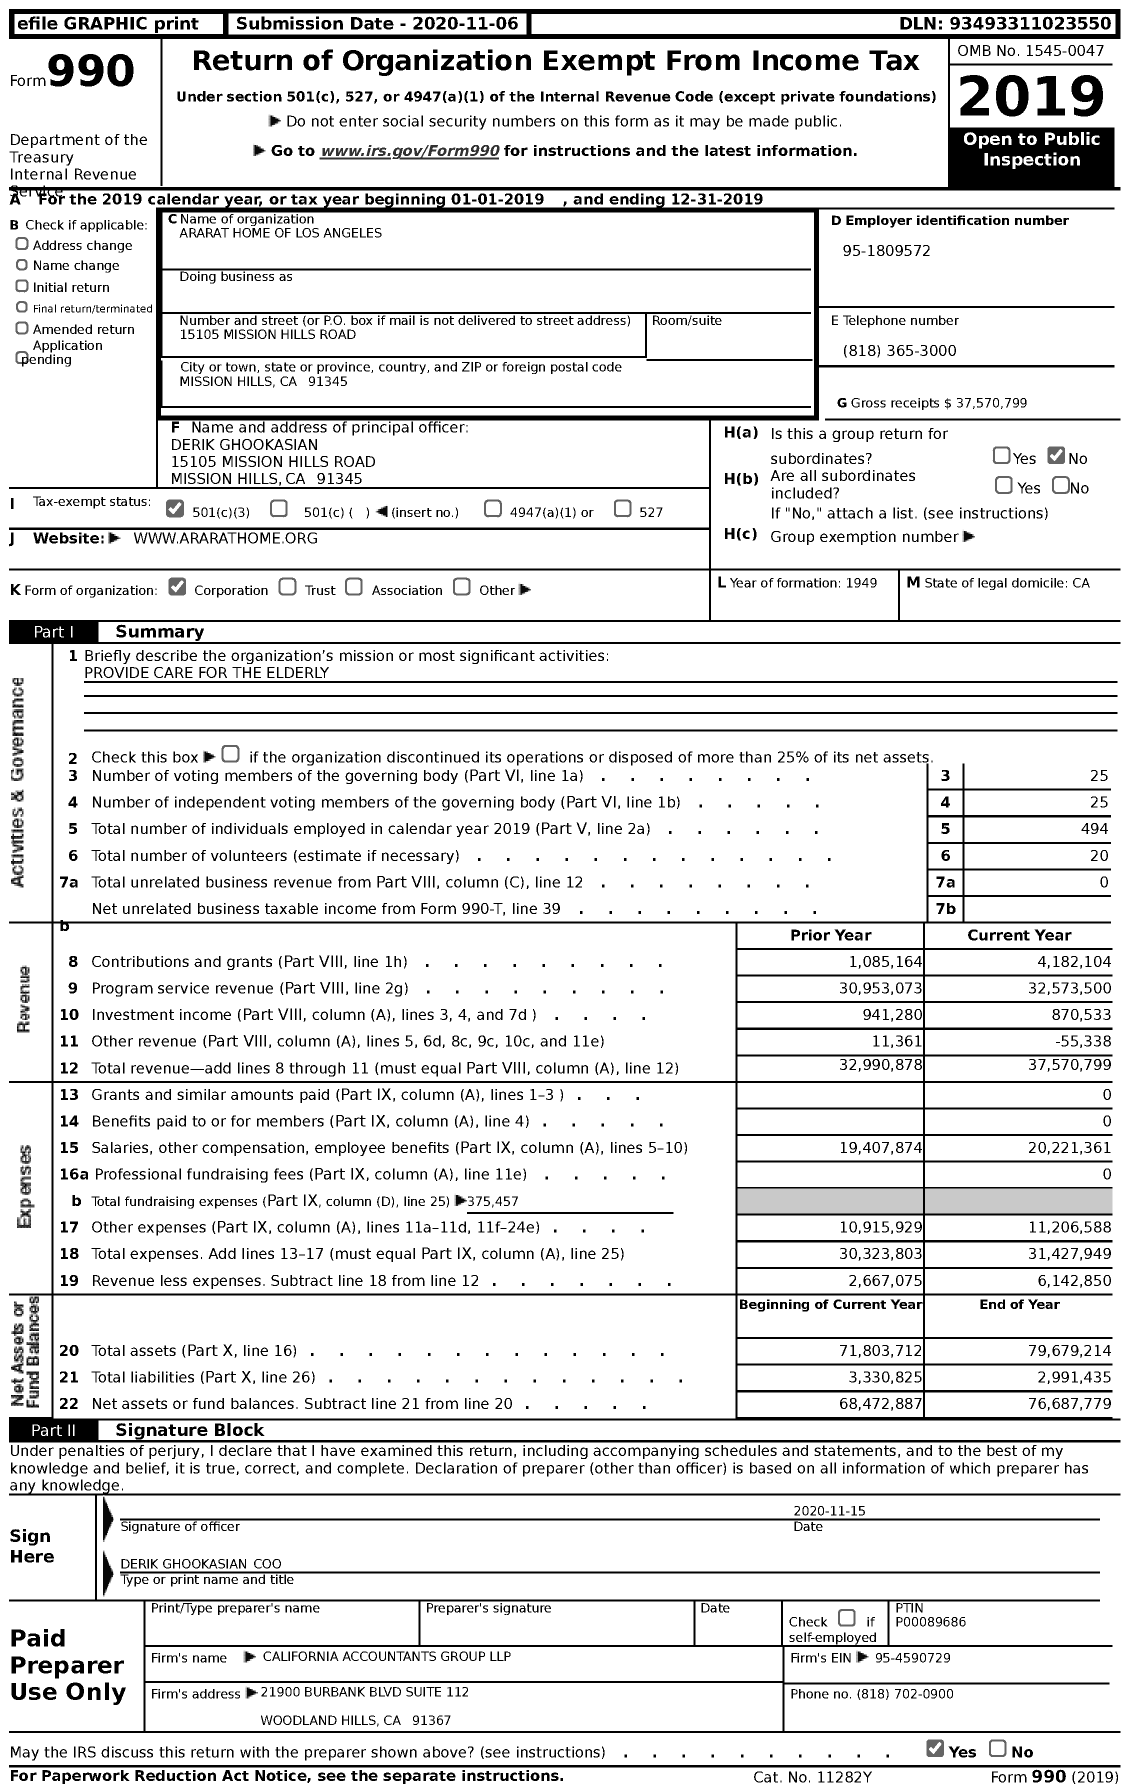 Image of first page of 2019 Form 990 for Ararat Home of Los Angeles